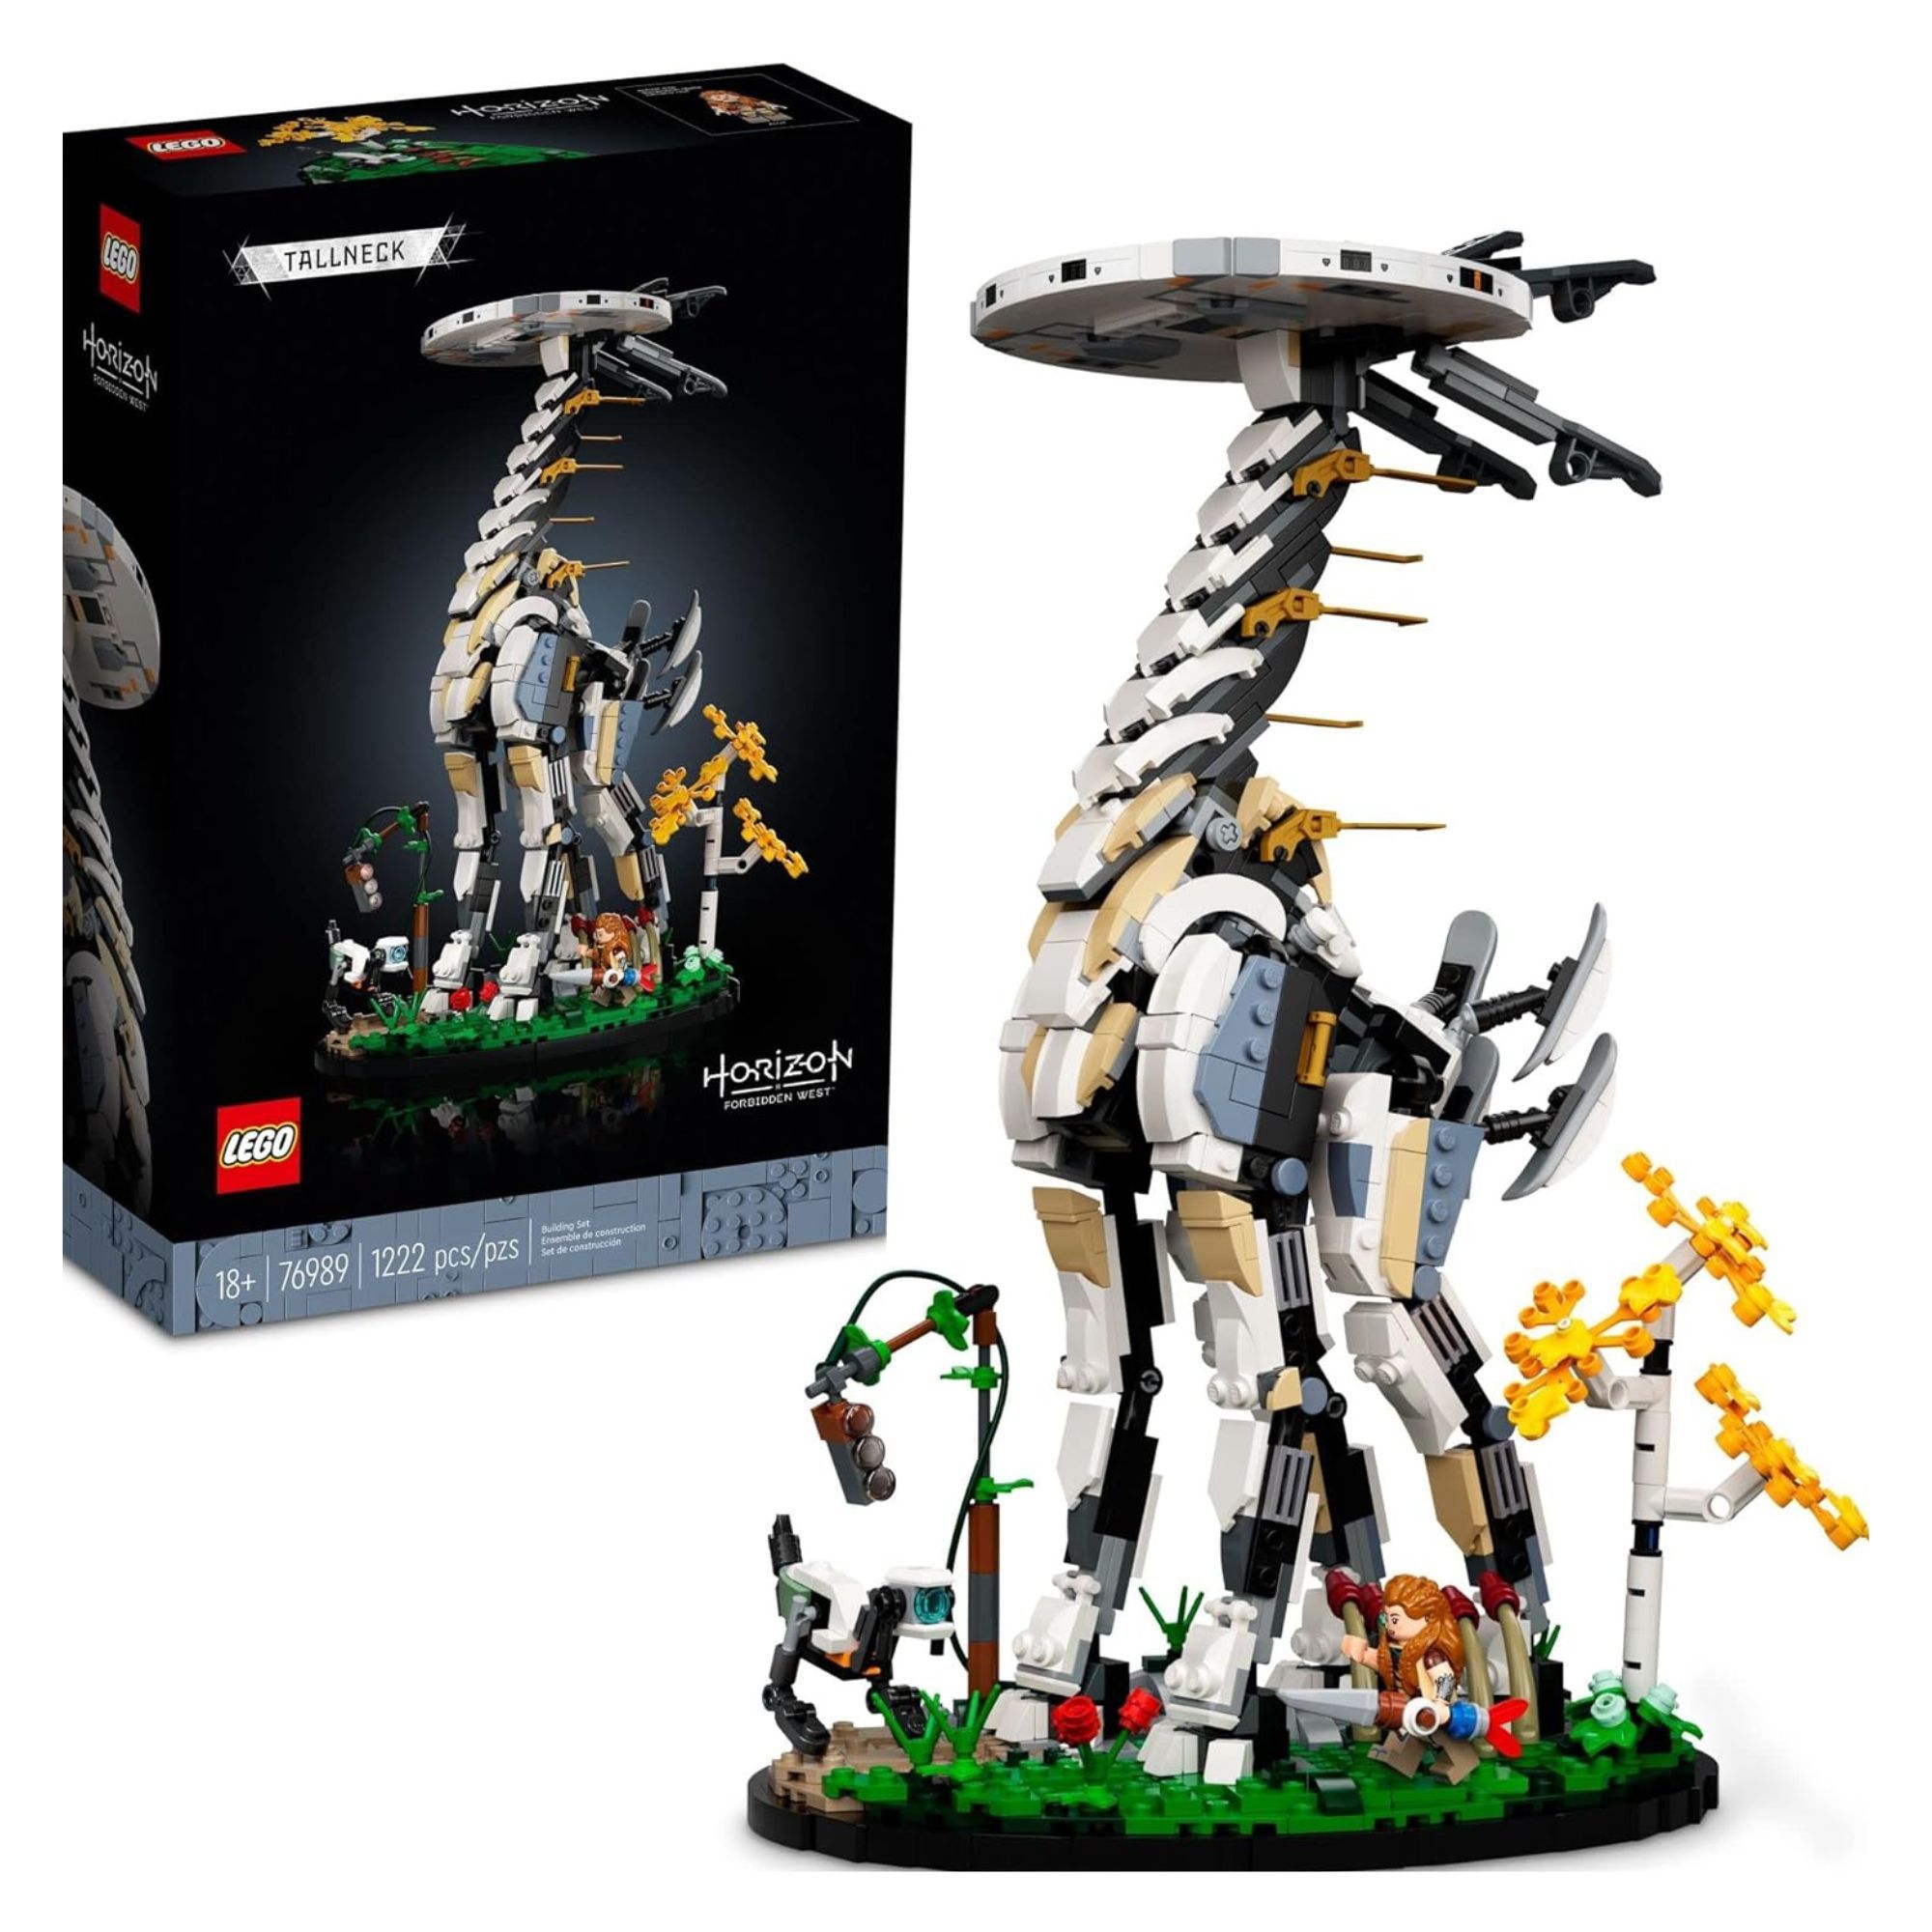 Product still of the LEGO Horizon Forbidden West Tallneck Building Set on a white background